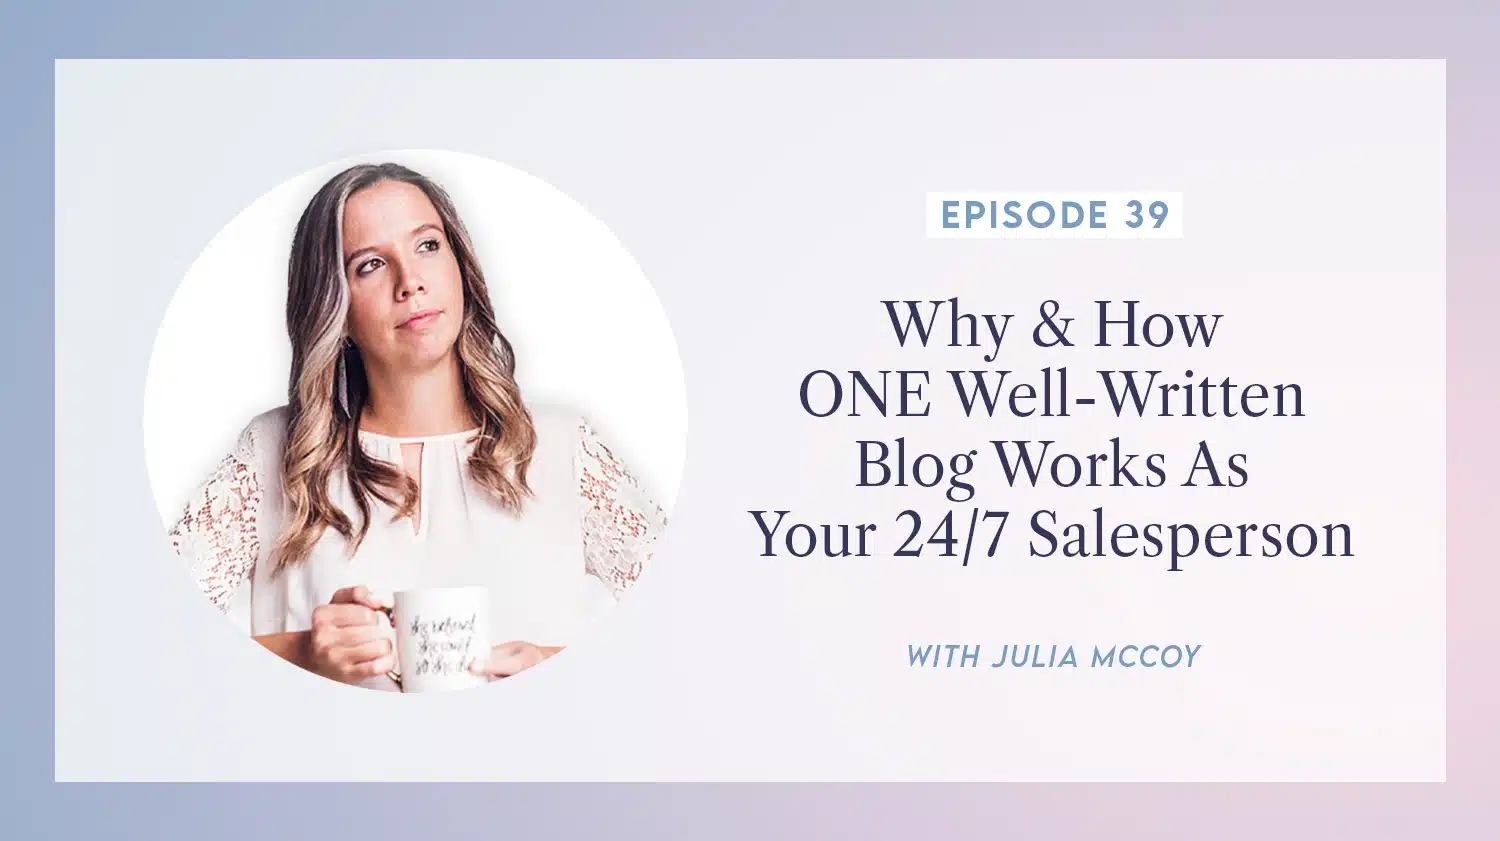 content transformation podcast with julia mccoy episode 39 why & how one well-written blog works as your 247 salesperson